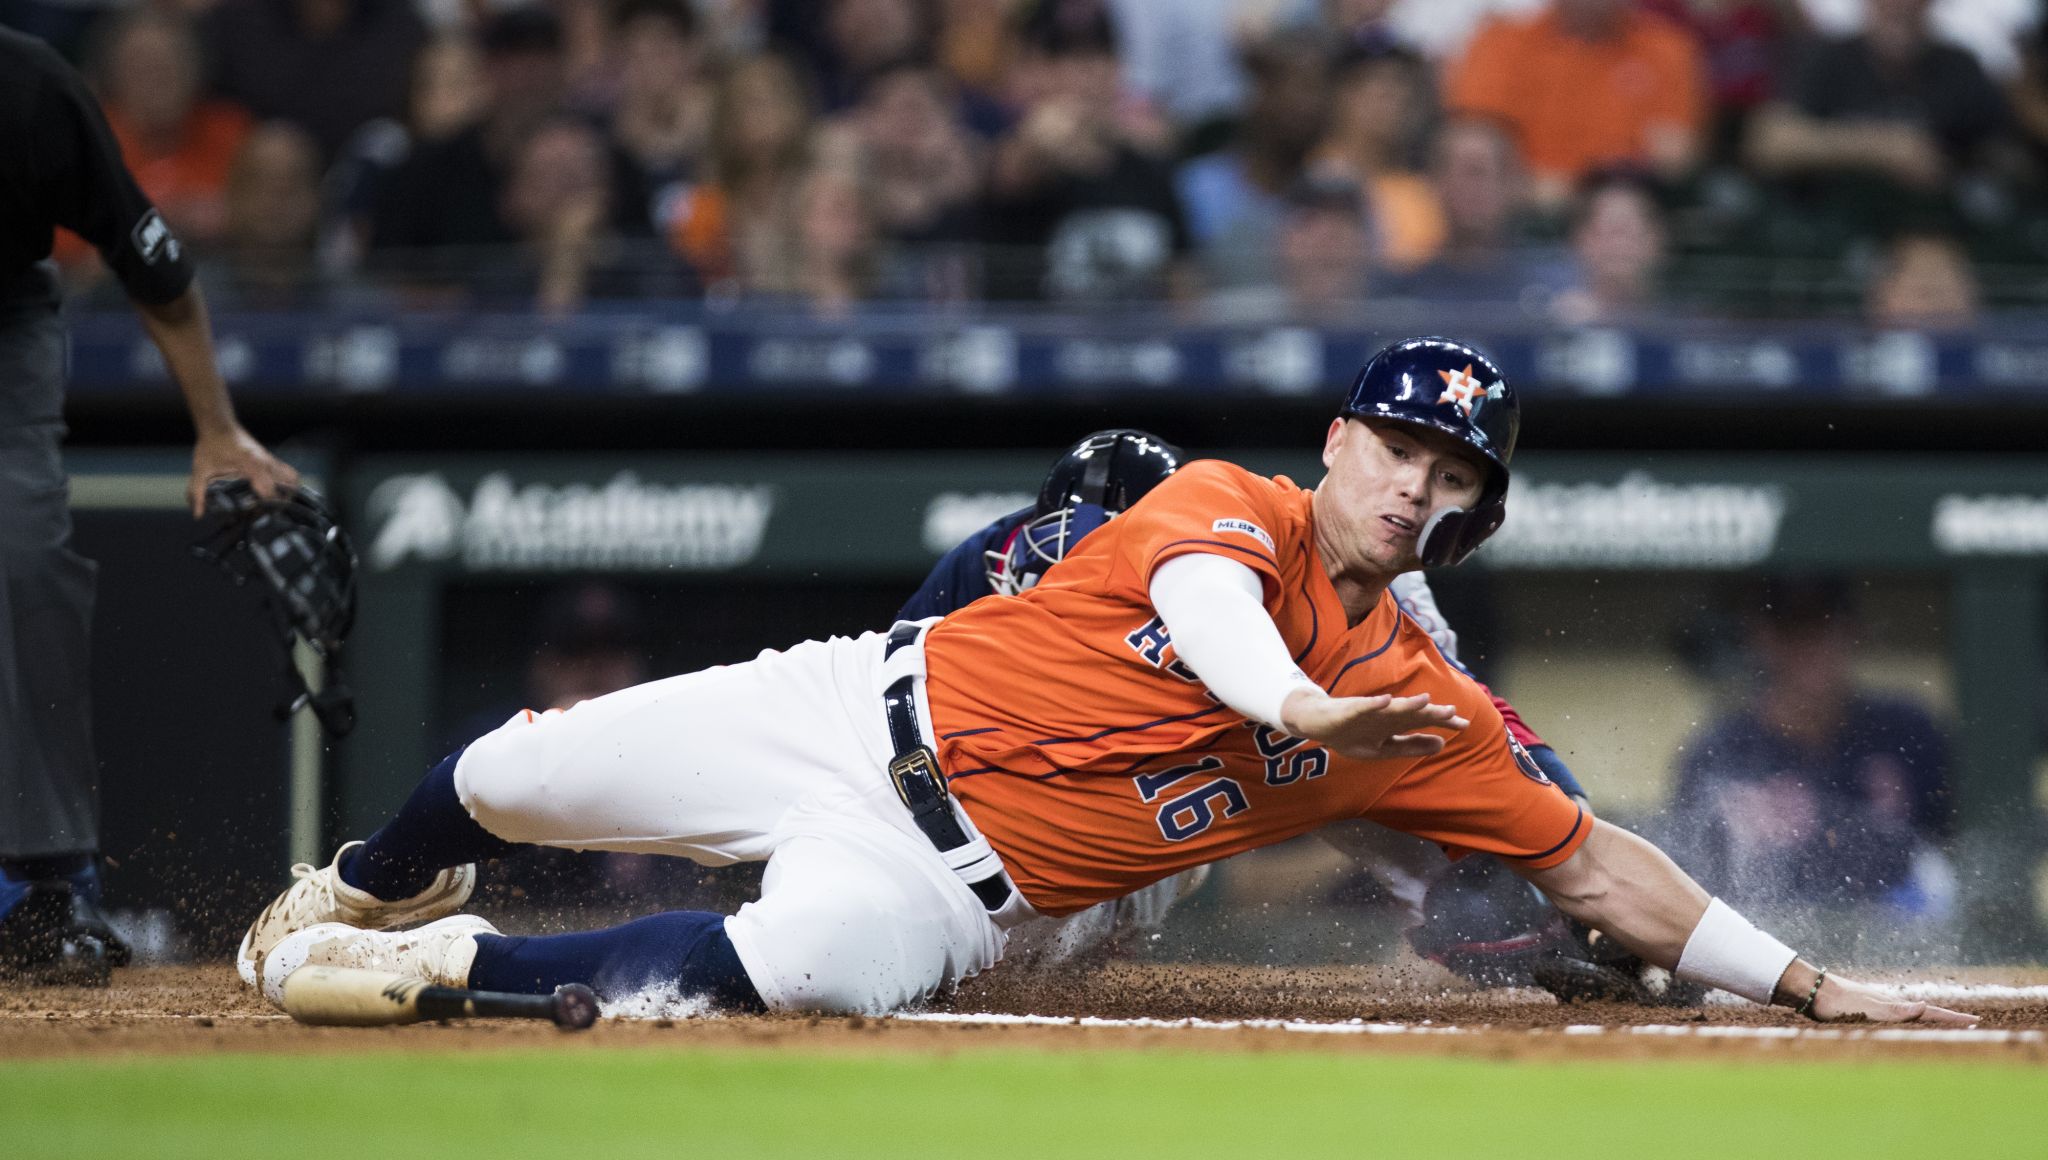 Carlos Correa Out with Rib Injury. Jose Altuve's Rehab Delayed by